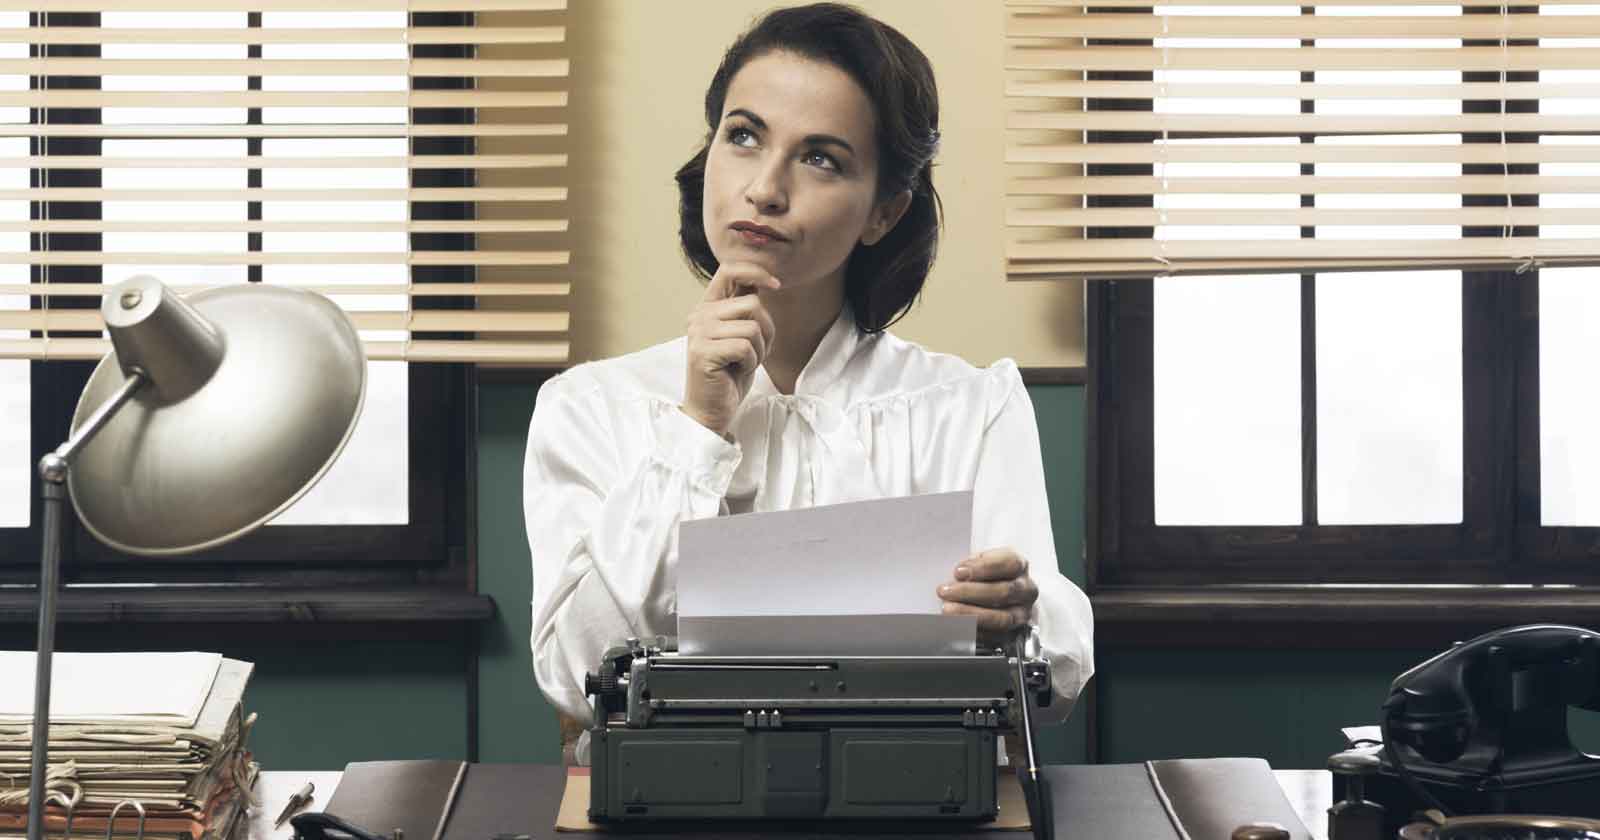 Image of a pensive public relations office woman at a typewriter